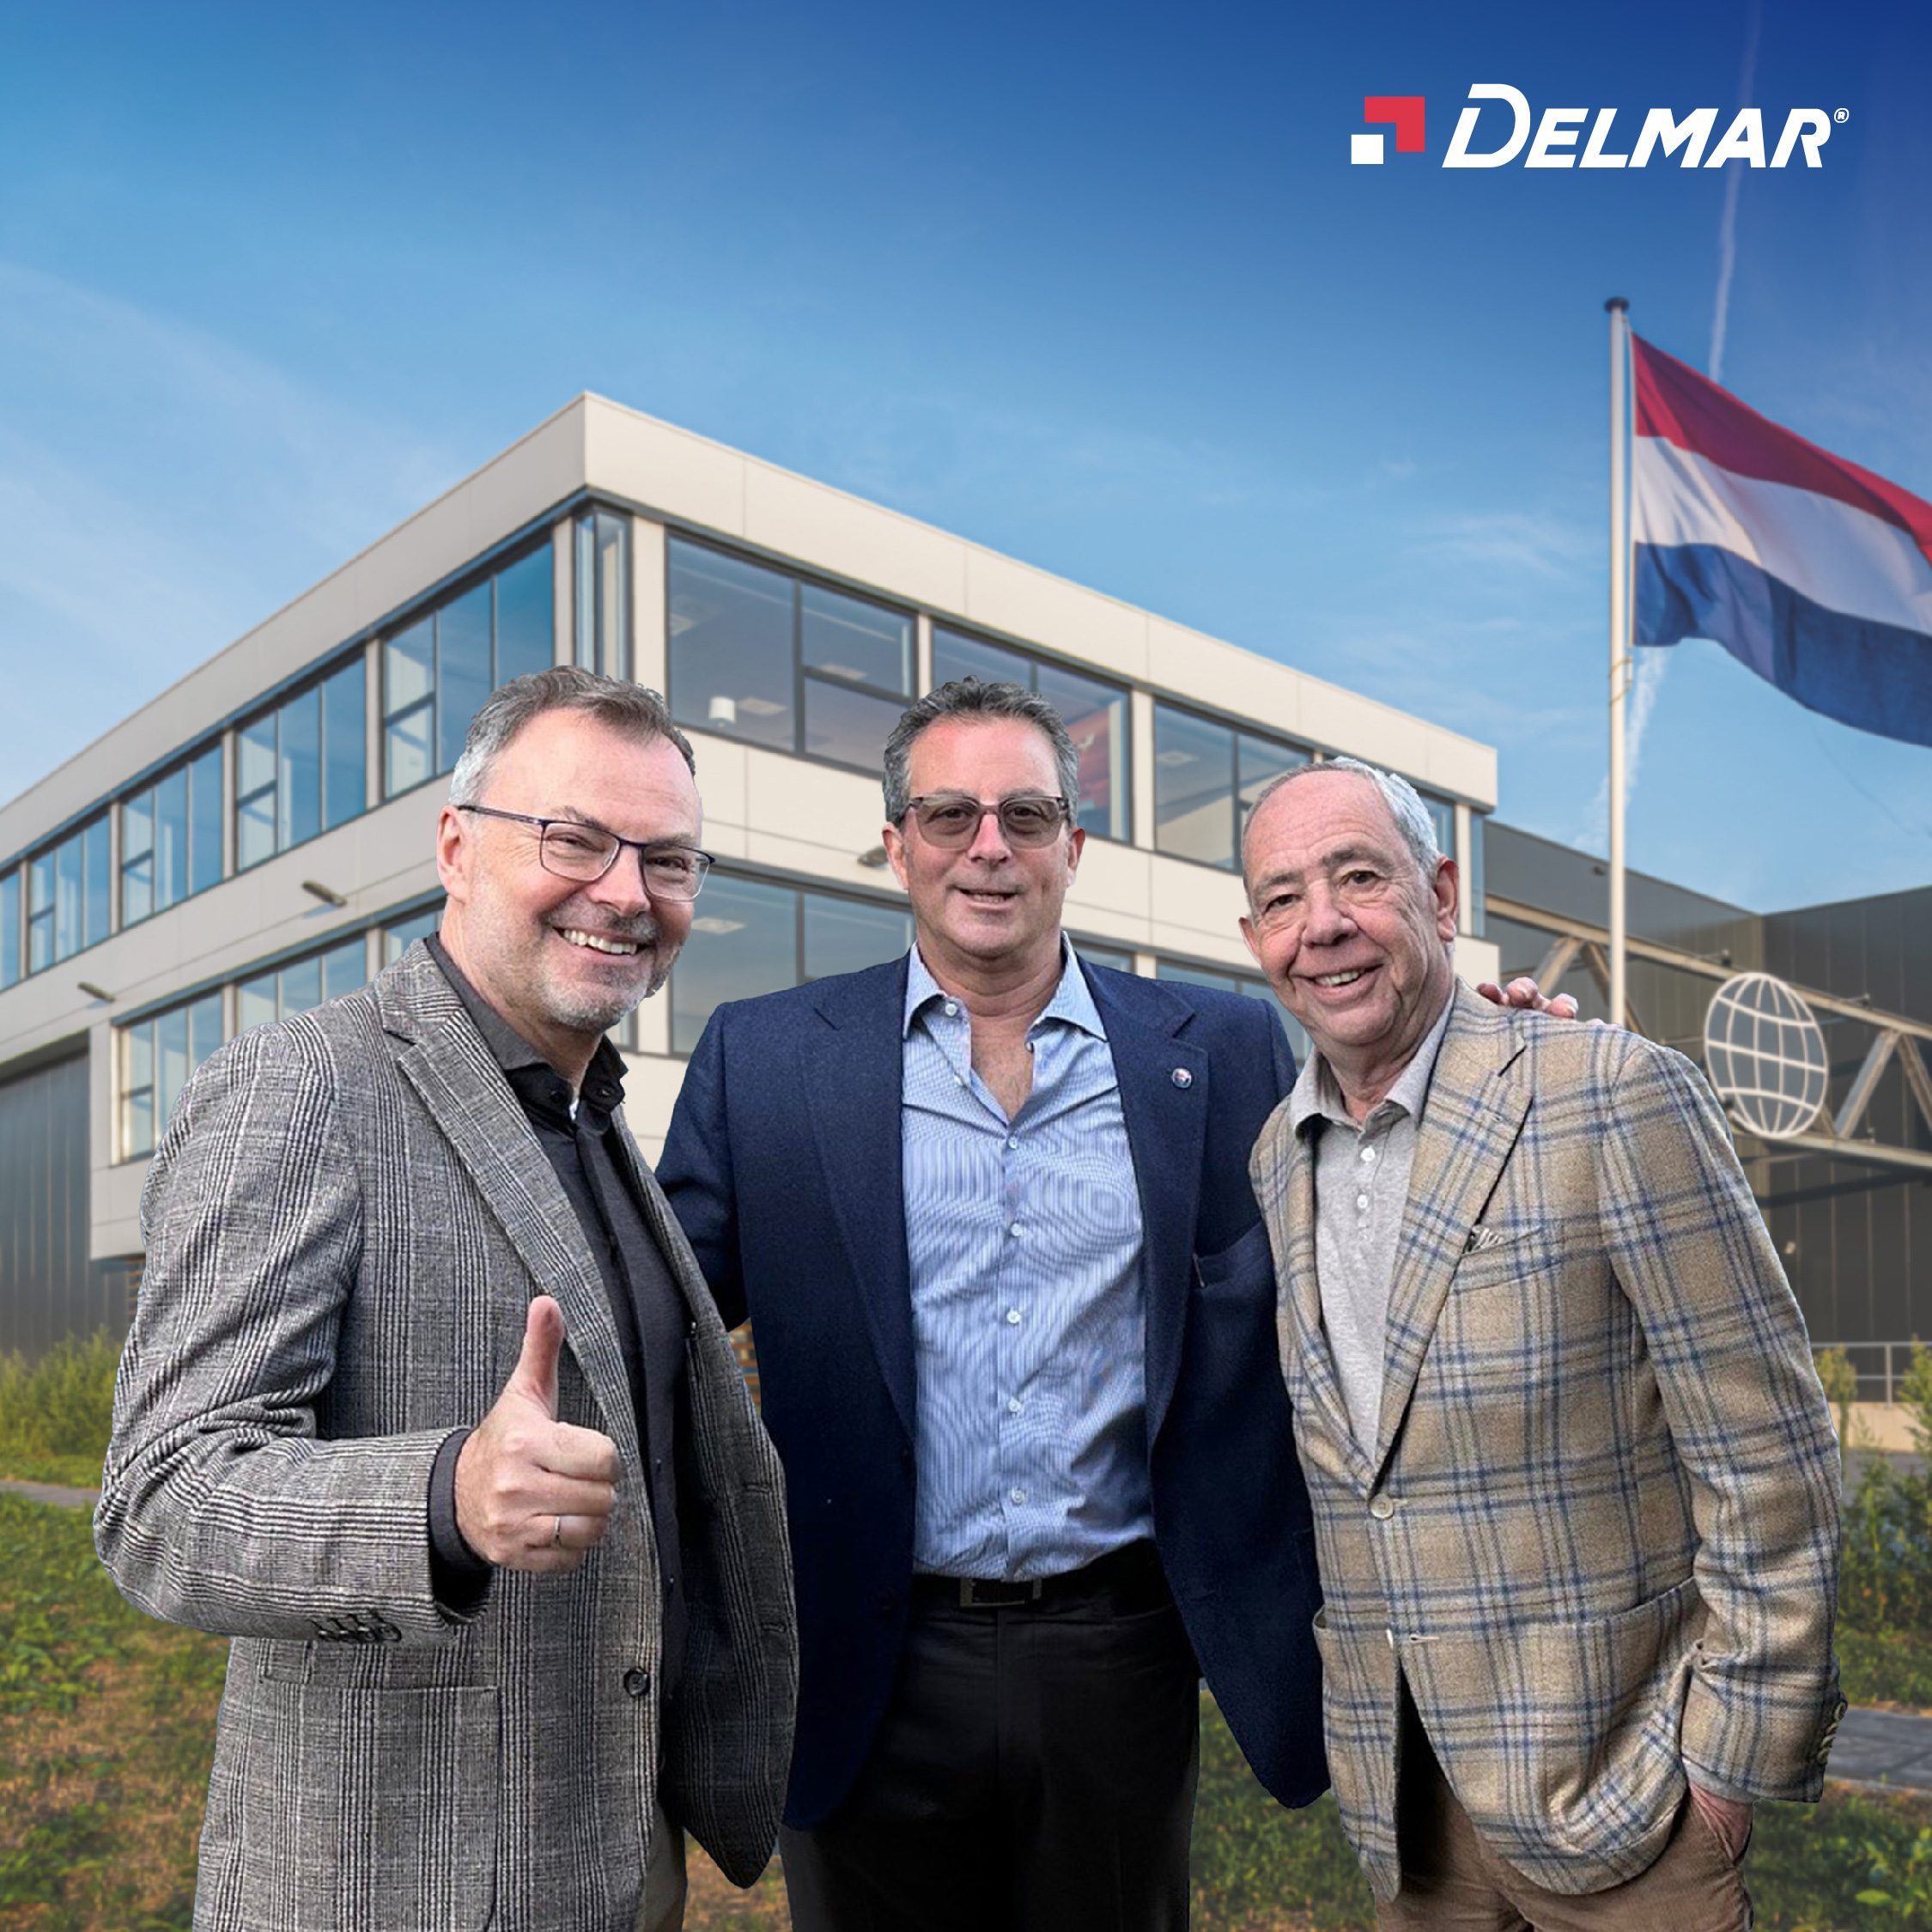 From left to right: Jörg Töpfer, Managing Director, Intervracht Nederland BV, Robert Cutler, President and CEO of The Delmar Group and Mike Wagen, COO